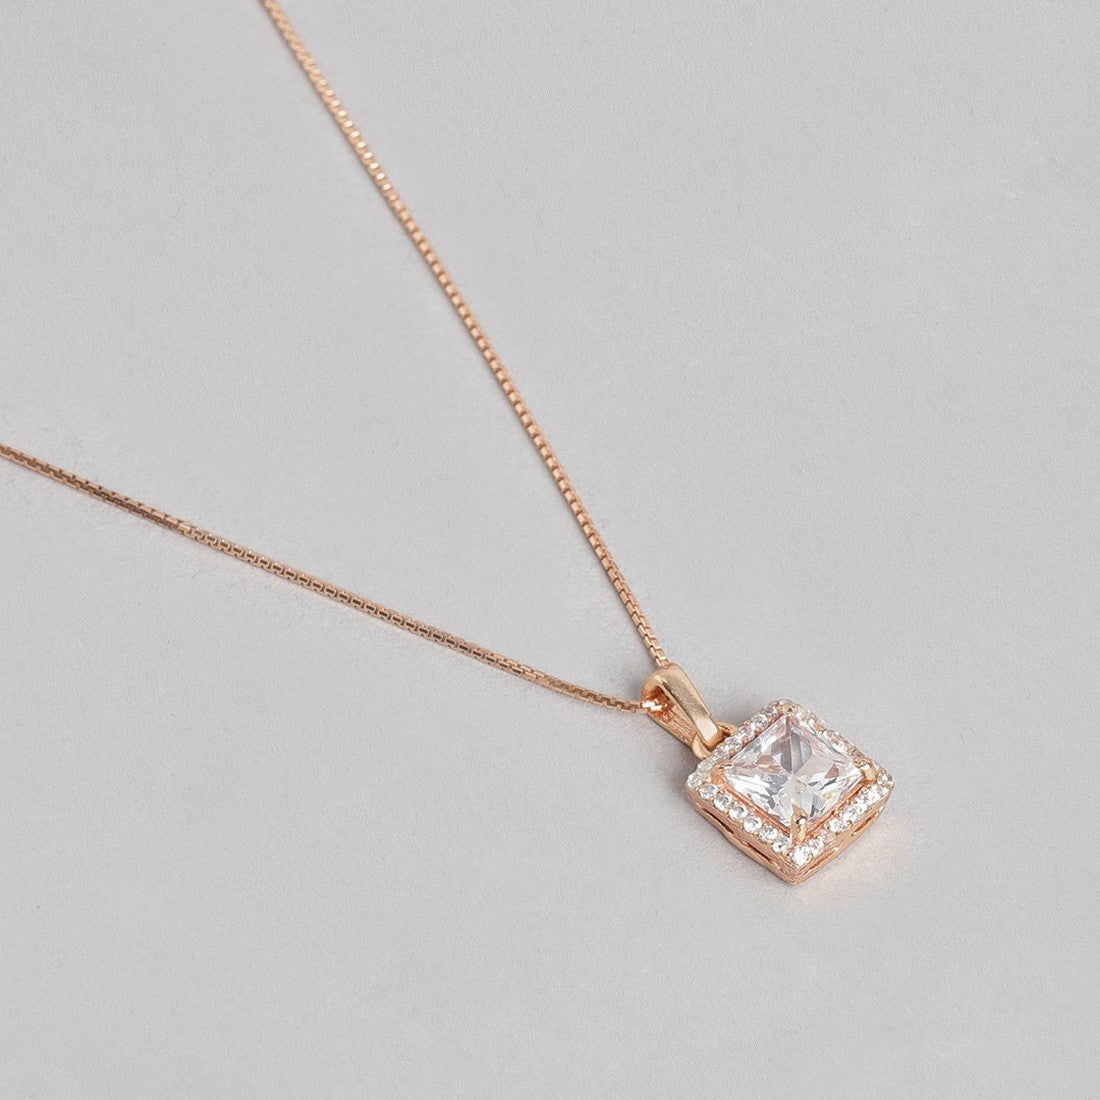 Square Solitaire Rose Gold Plated 925 Sterling Silver Pendant with Chain